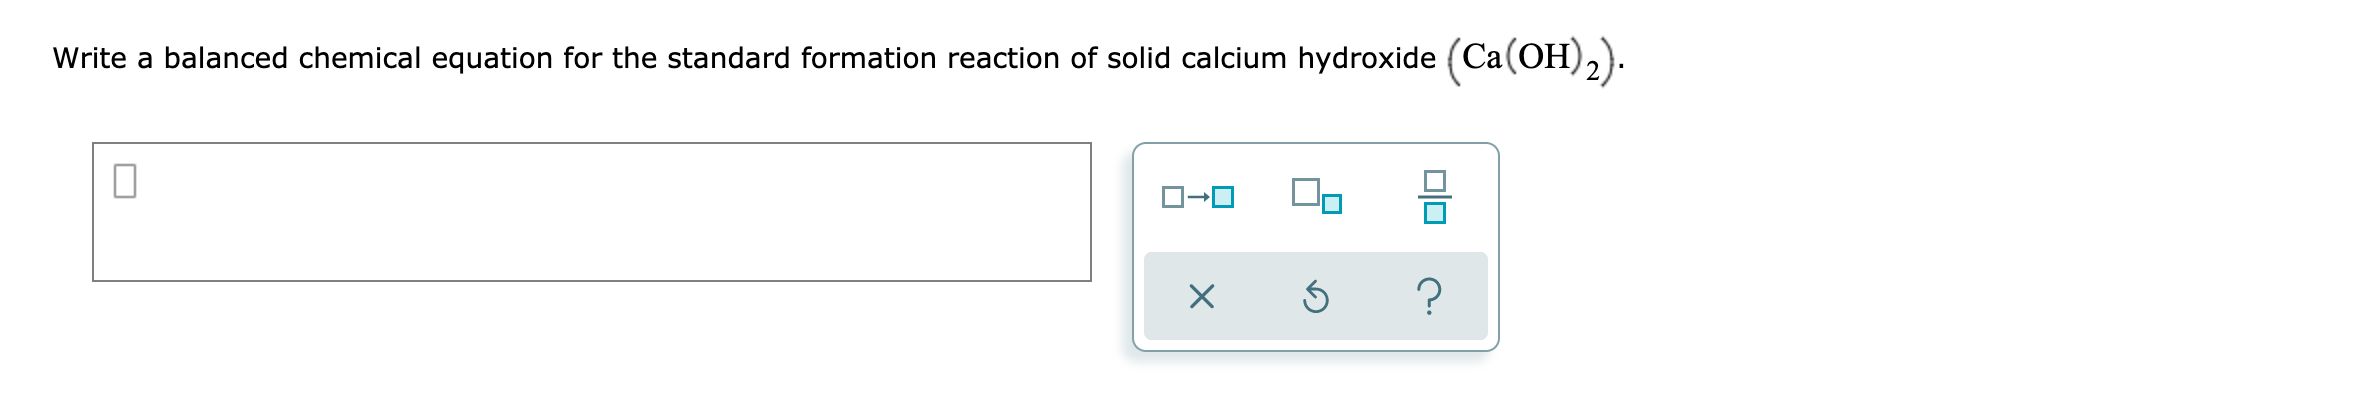 Write a balanced chemical equation for the standard formation reaction of solid calcium hydroxide (Ca(OH),).
